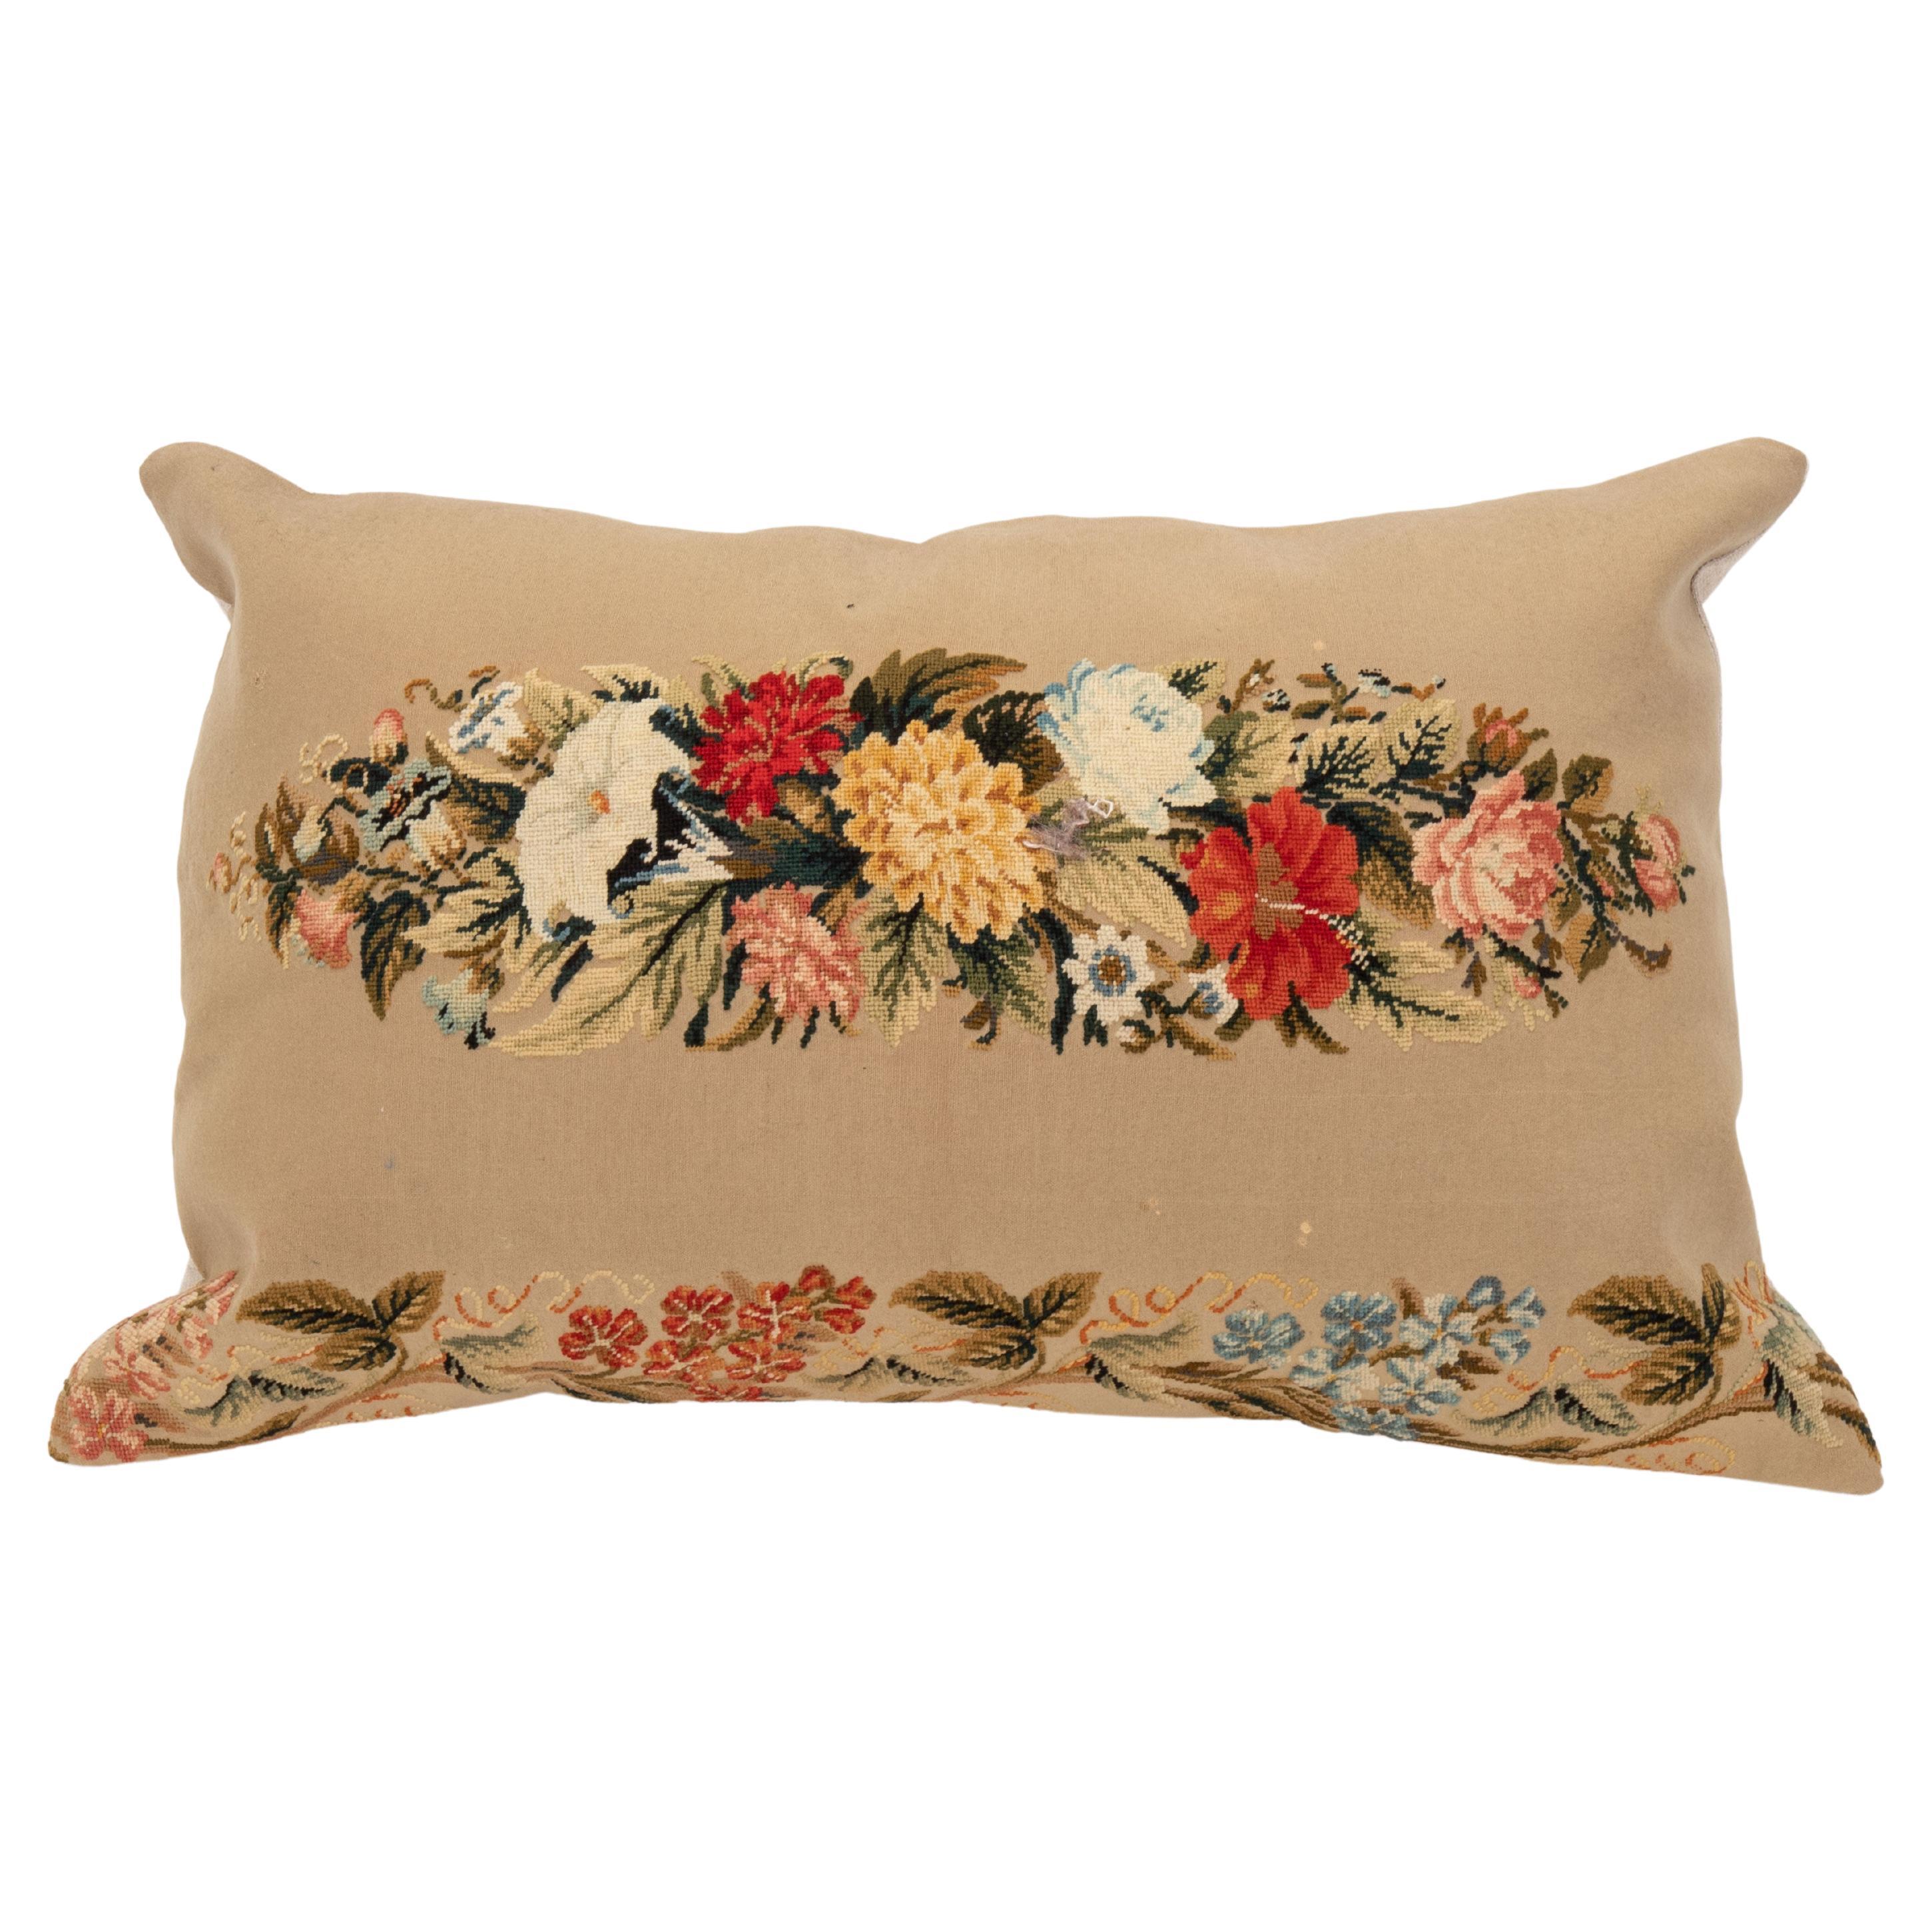 Pillow Case Made from a European Embroidery, E 20th C. For Sale